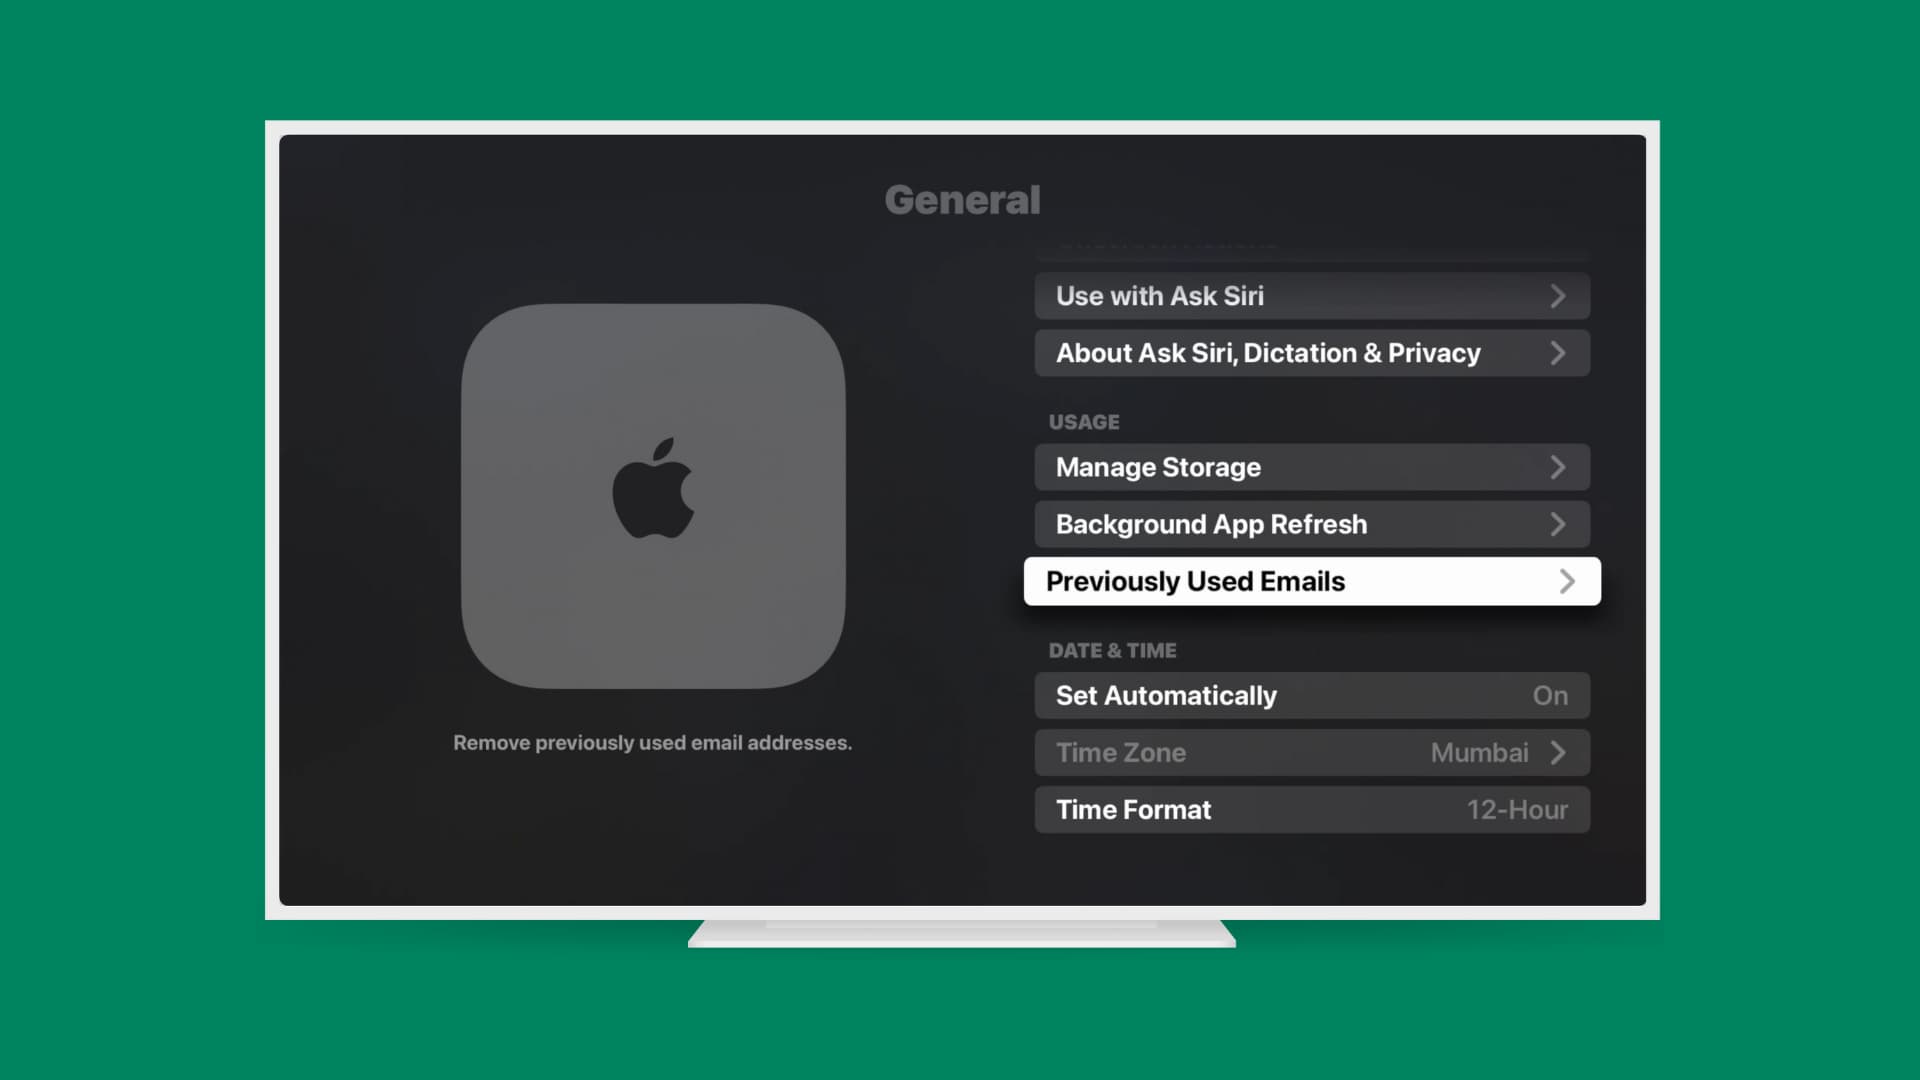 Previously Used Emails settings on Apple TV